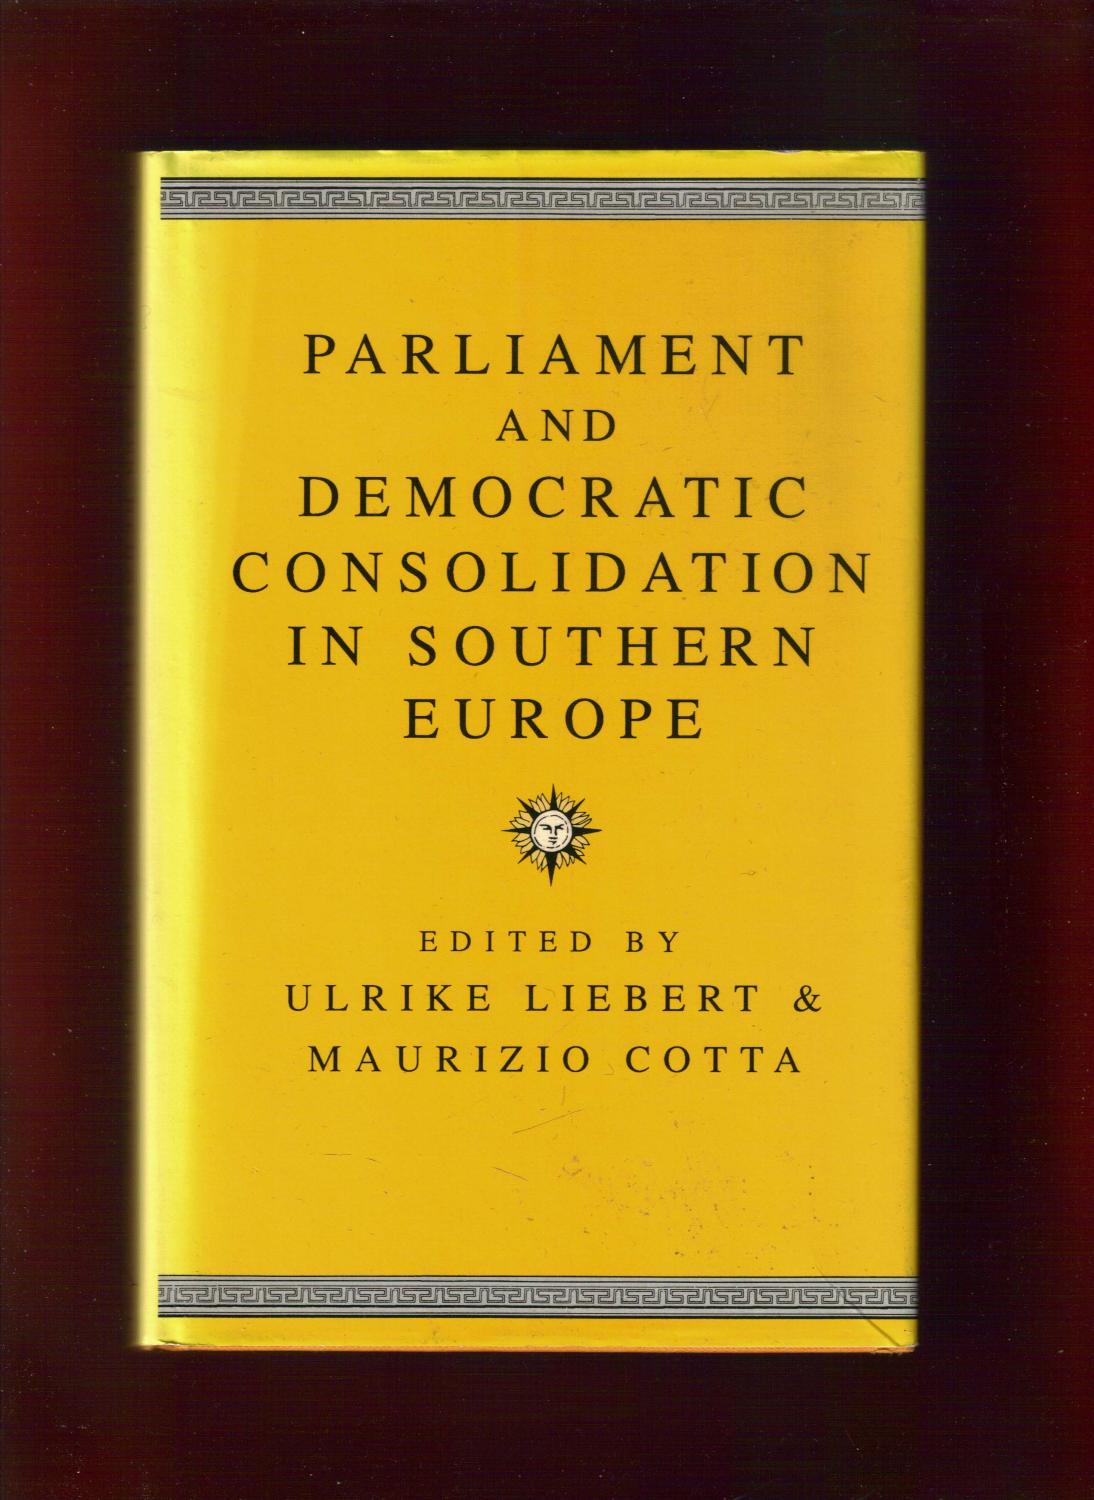 Parliament and Democratic Consolidation in Southern Europe